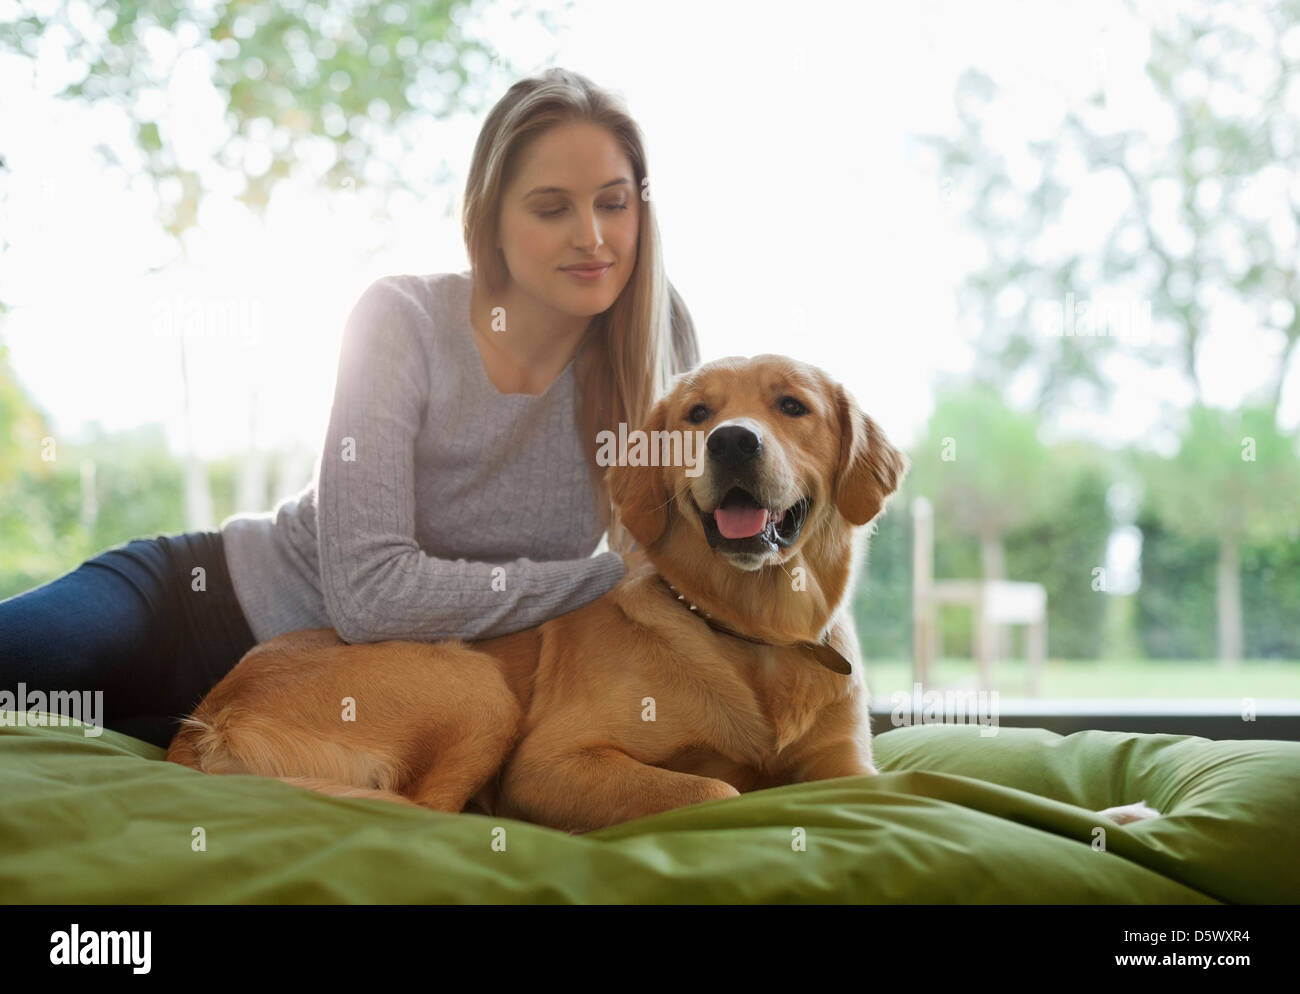 Woman petting dog on bed Stock Photo